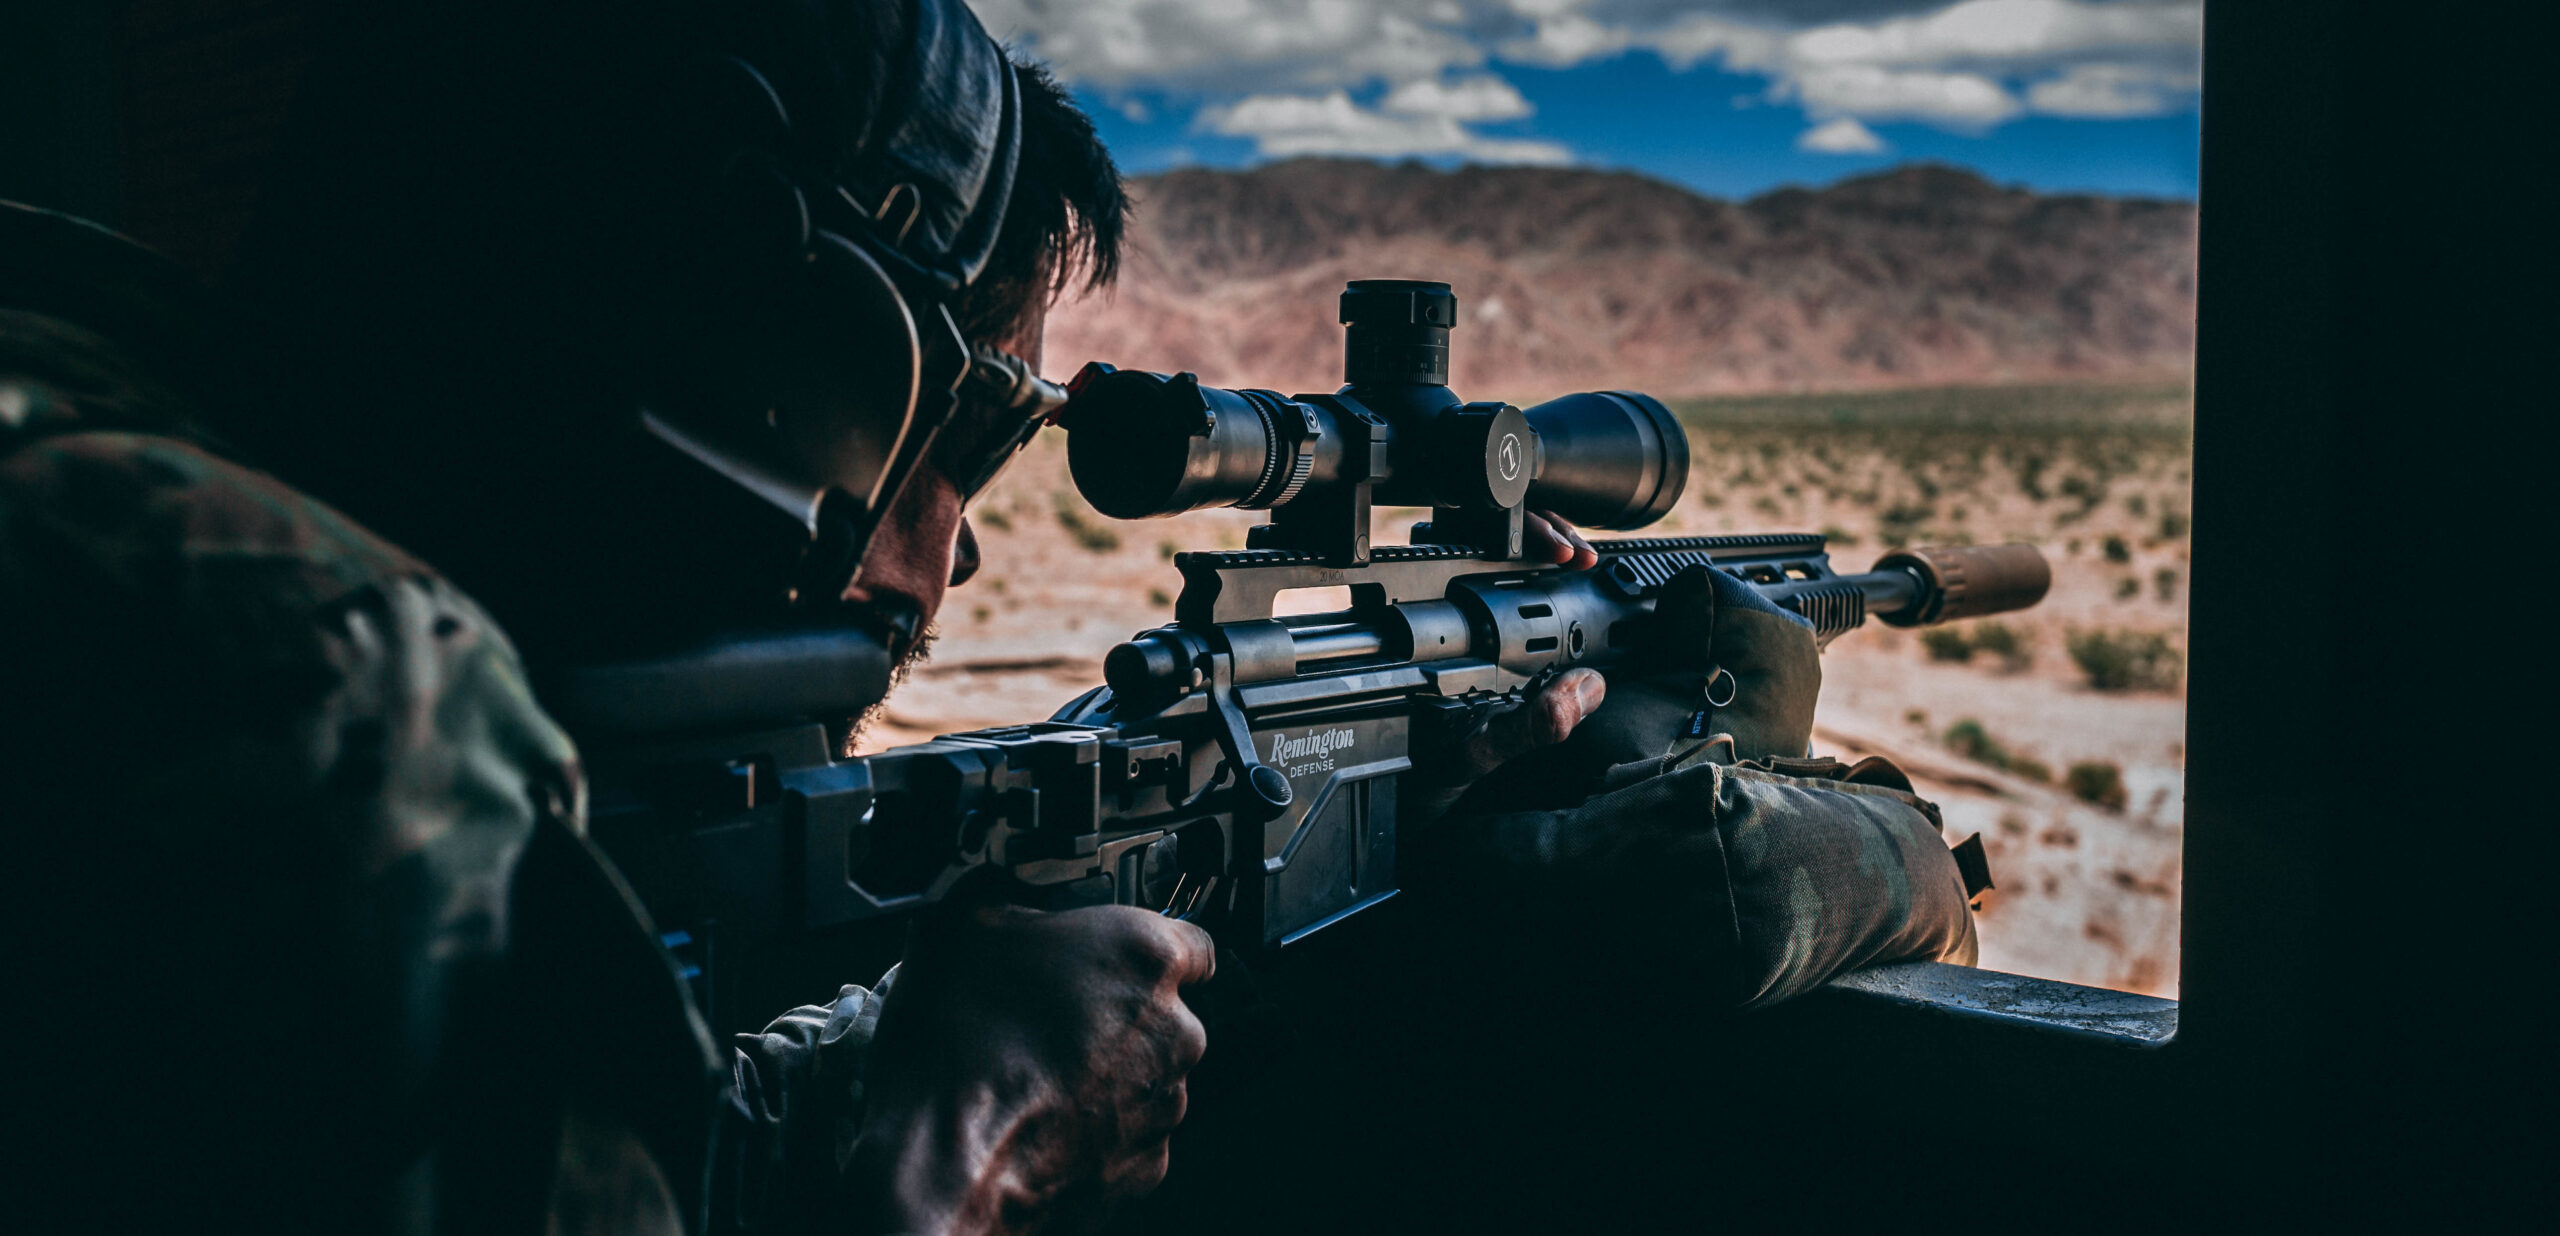 SOCOM is looking for a new multi-caliber sniper rifle